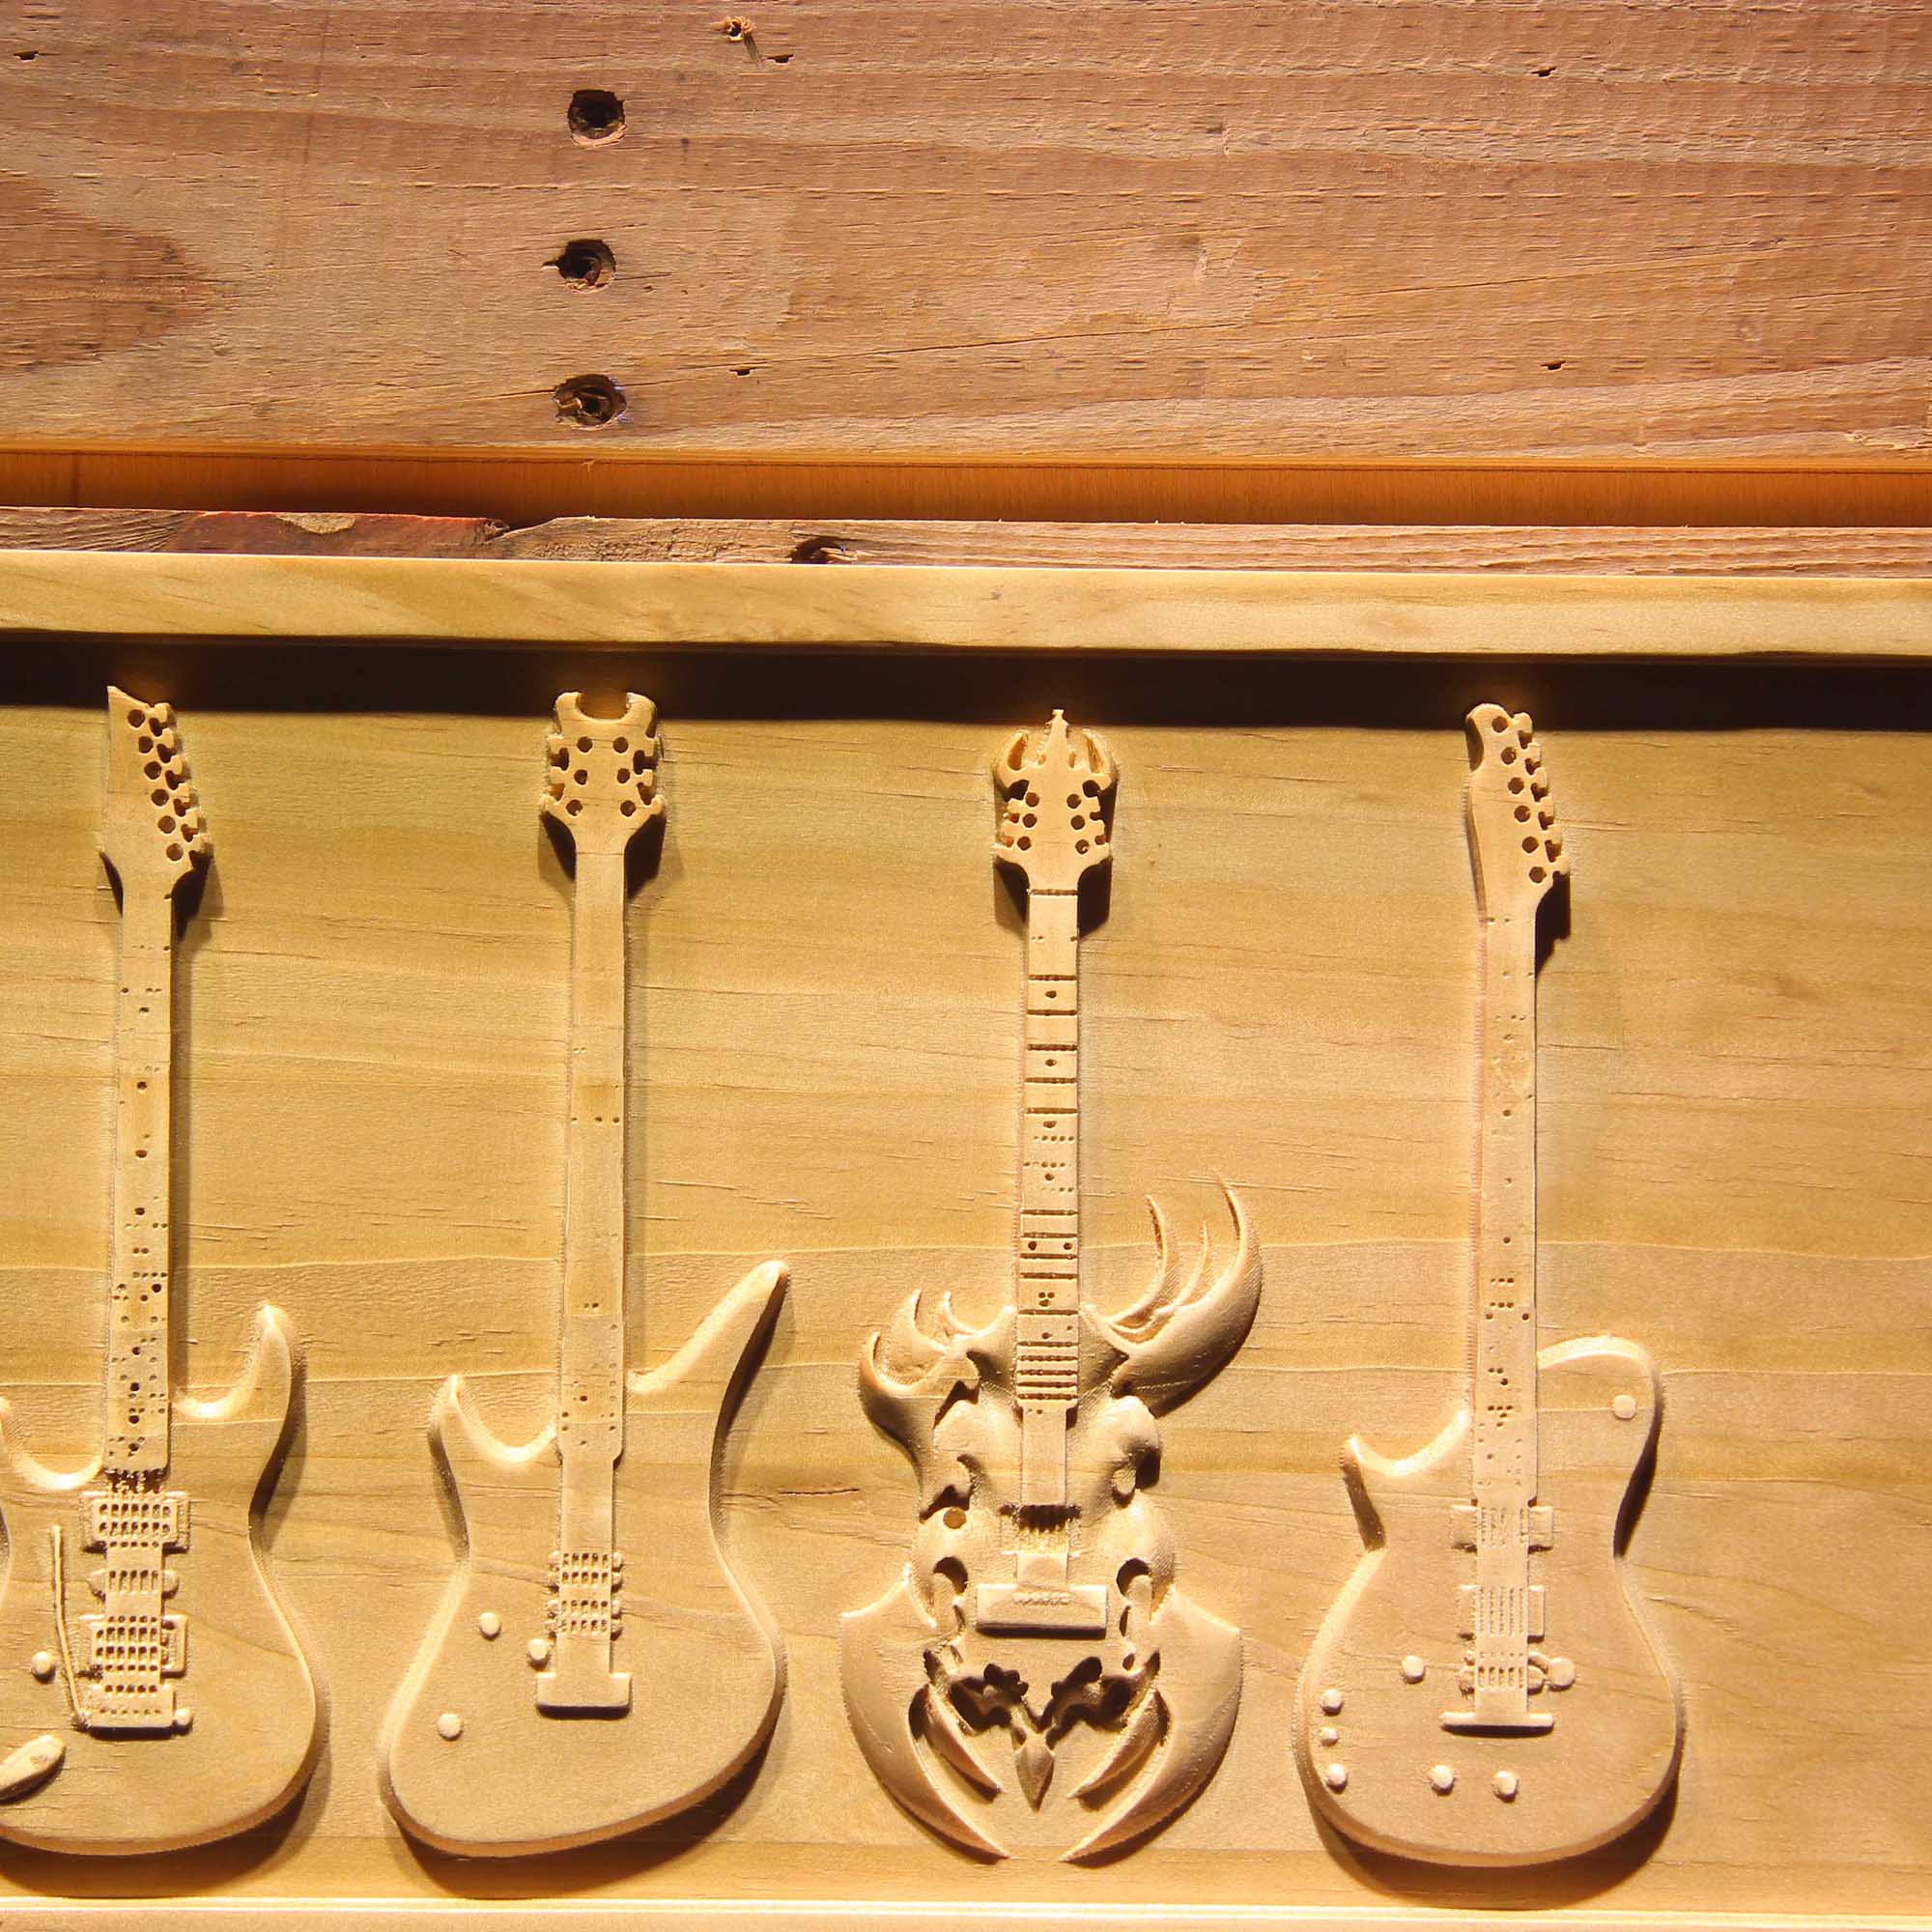 Guitar Weapons 3D Wooden Engrave Sign